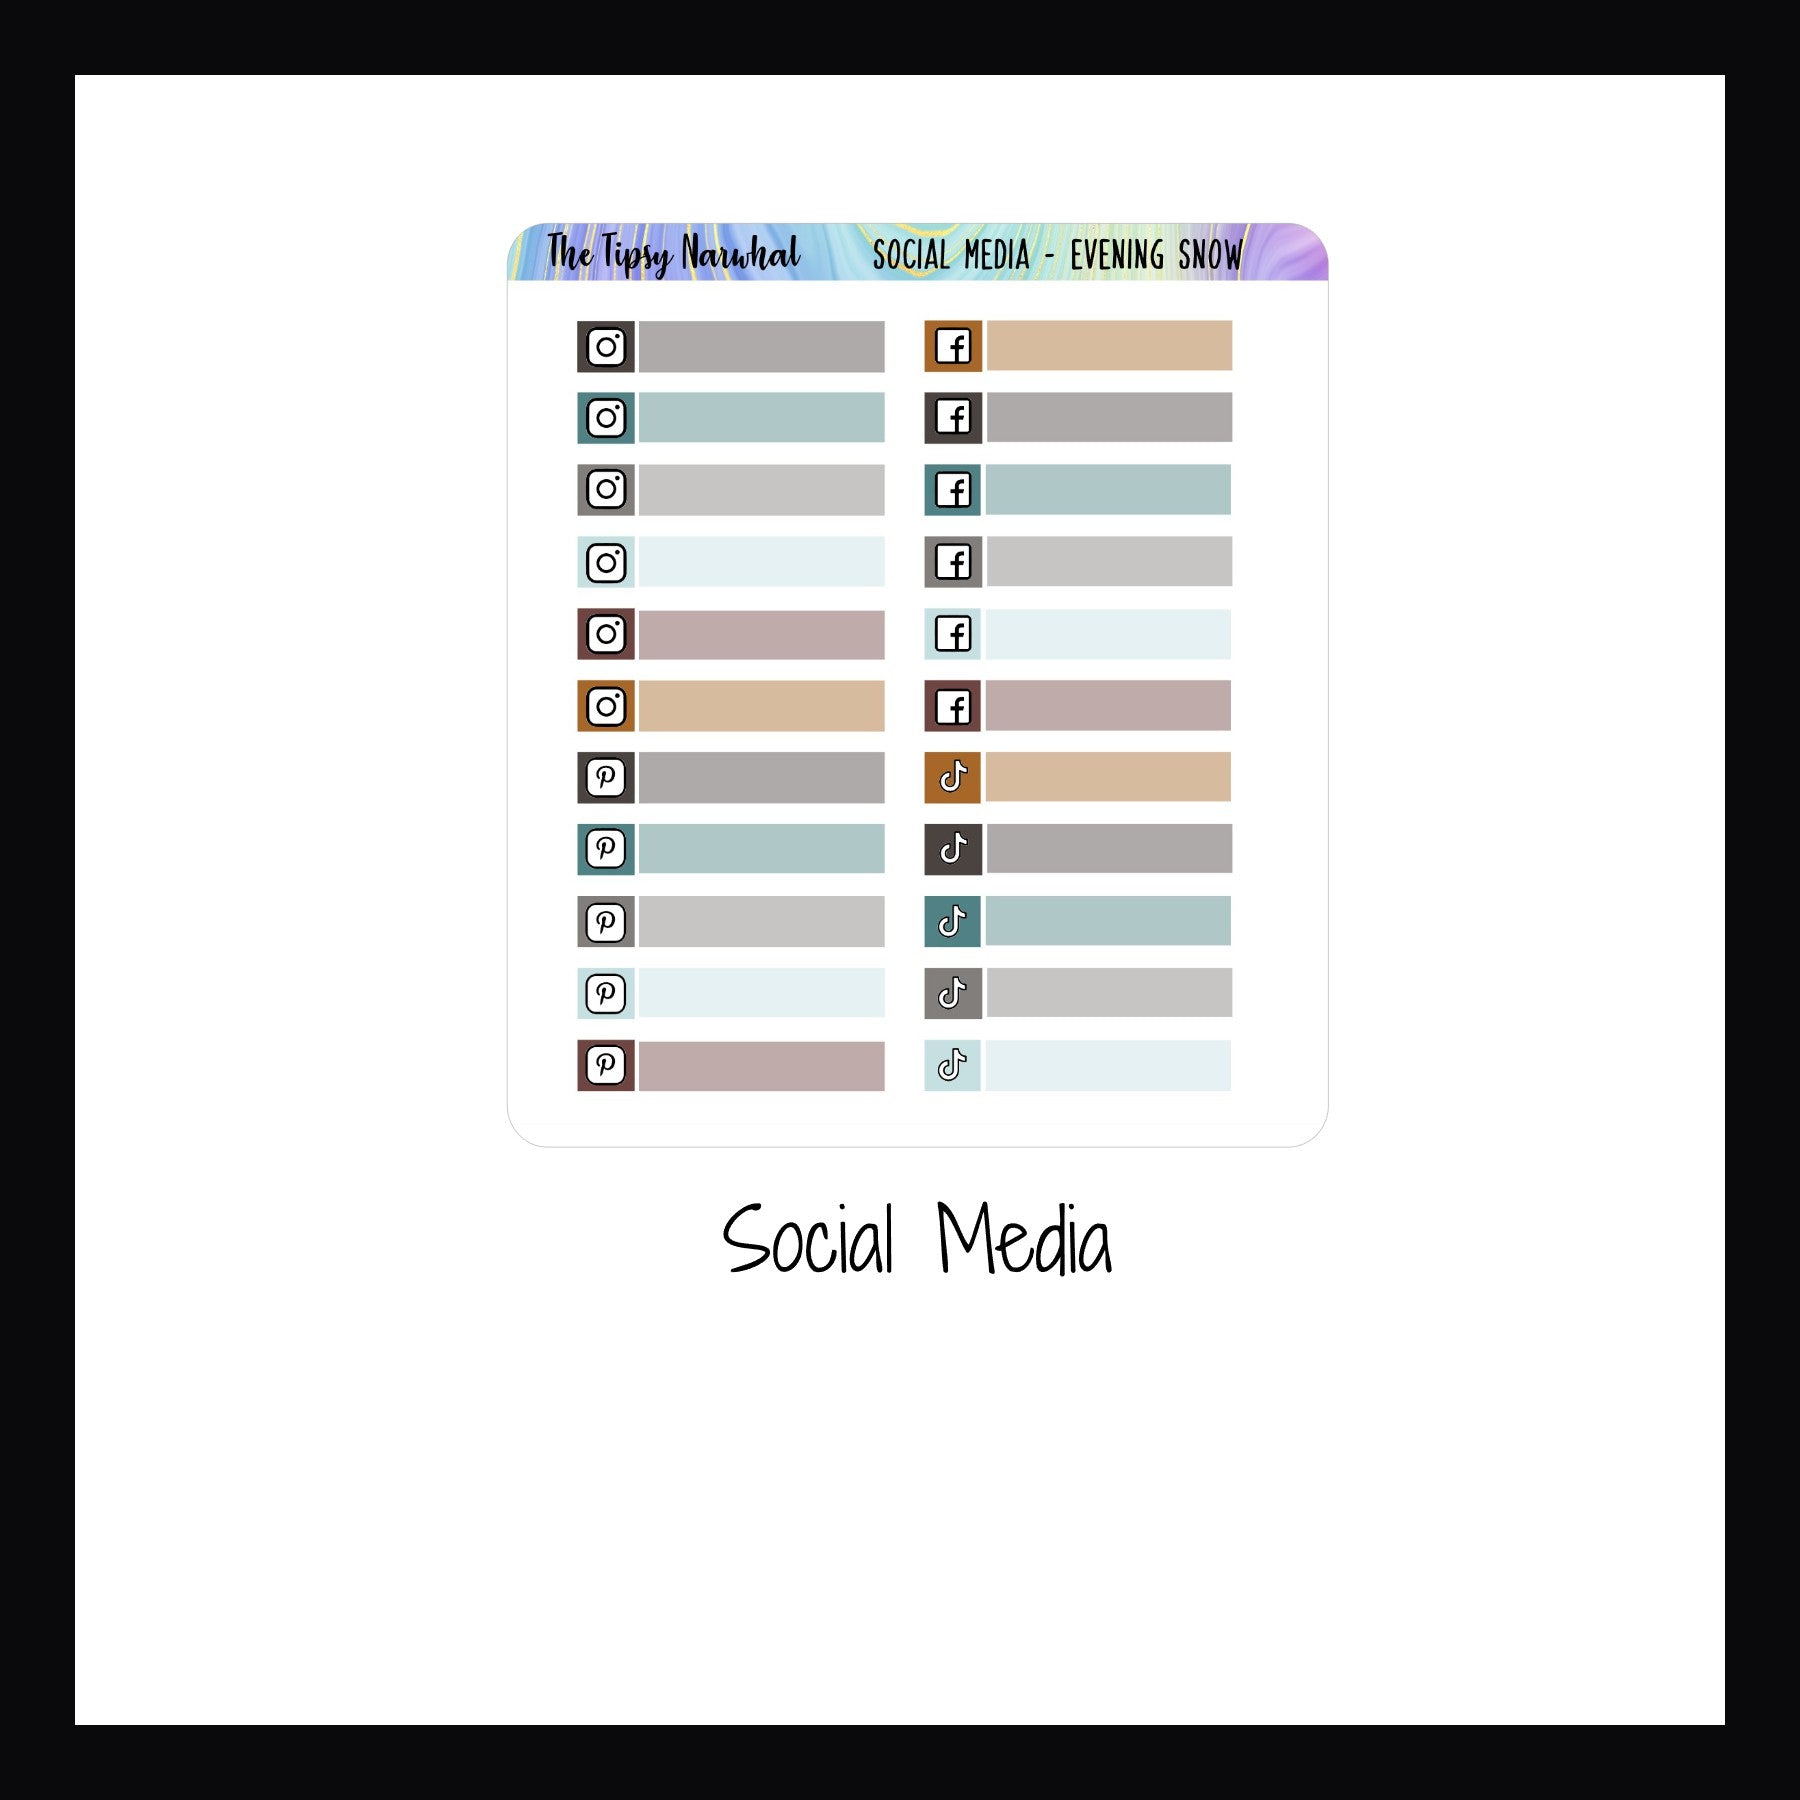 Evening Snow Kit Matching Functional Social Media Sheet - This sticker sheet features multiple skinny stickers to track posts on social media sites such as Instagram, Facebook, Pinterest and TikTok